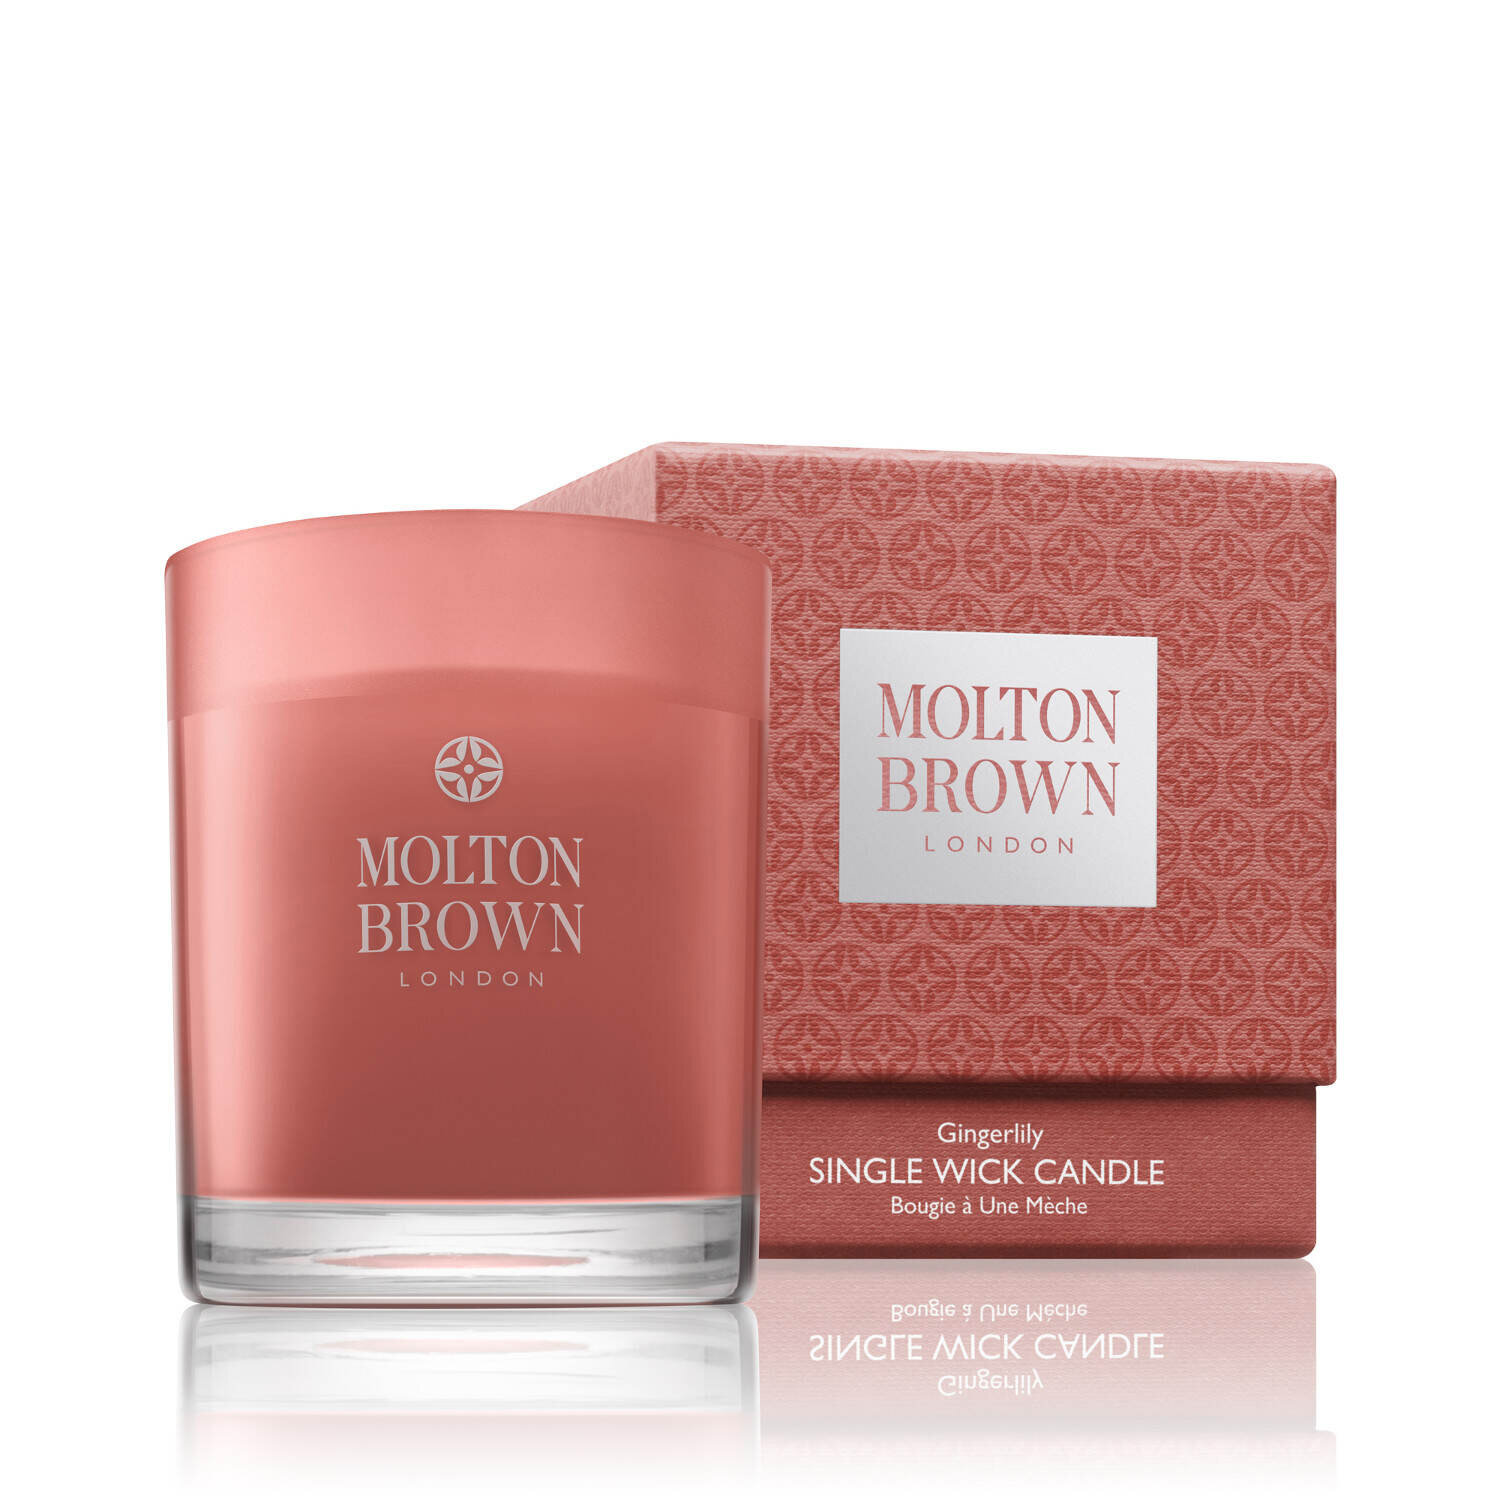 Molton Brown London Spiced Kindling Mini Candle Collection Gift Set 